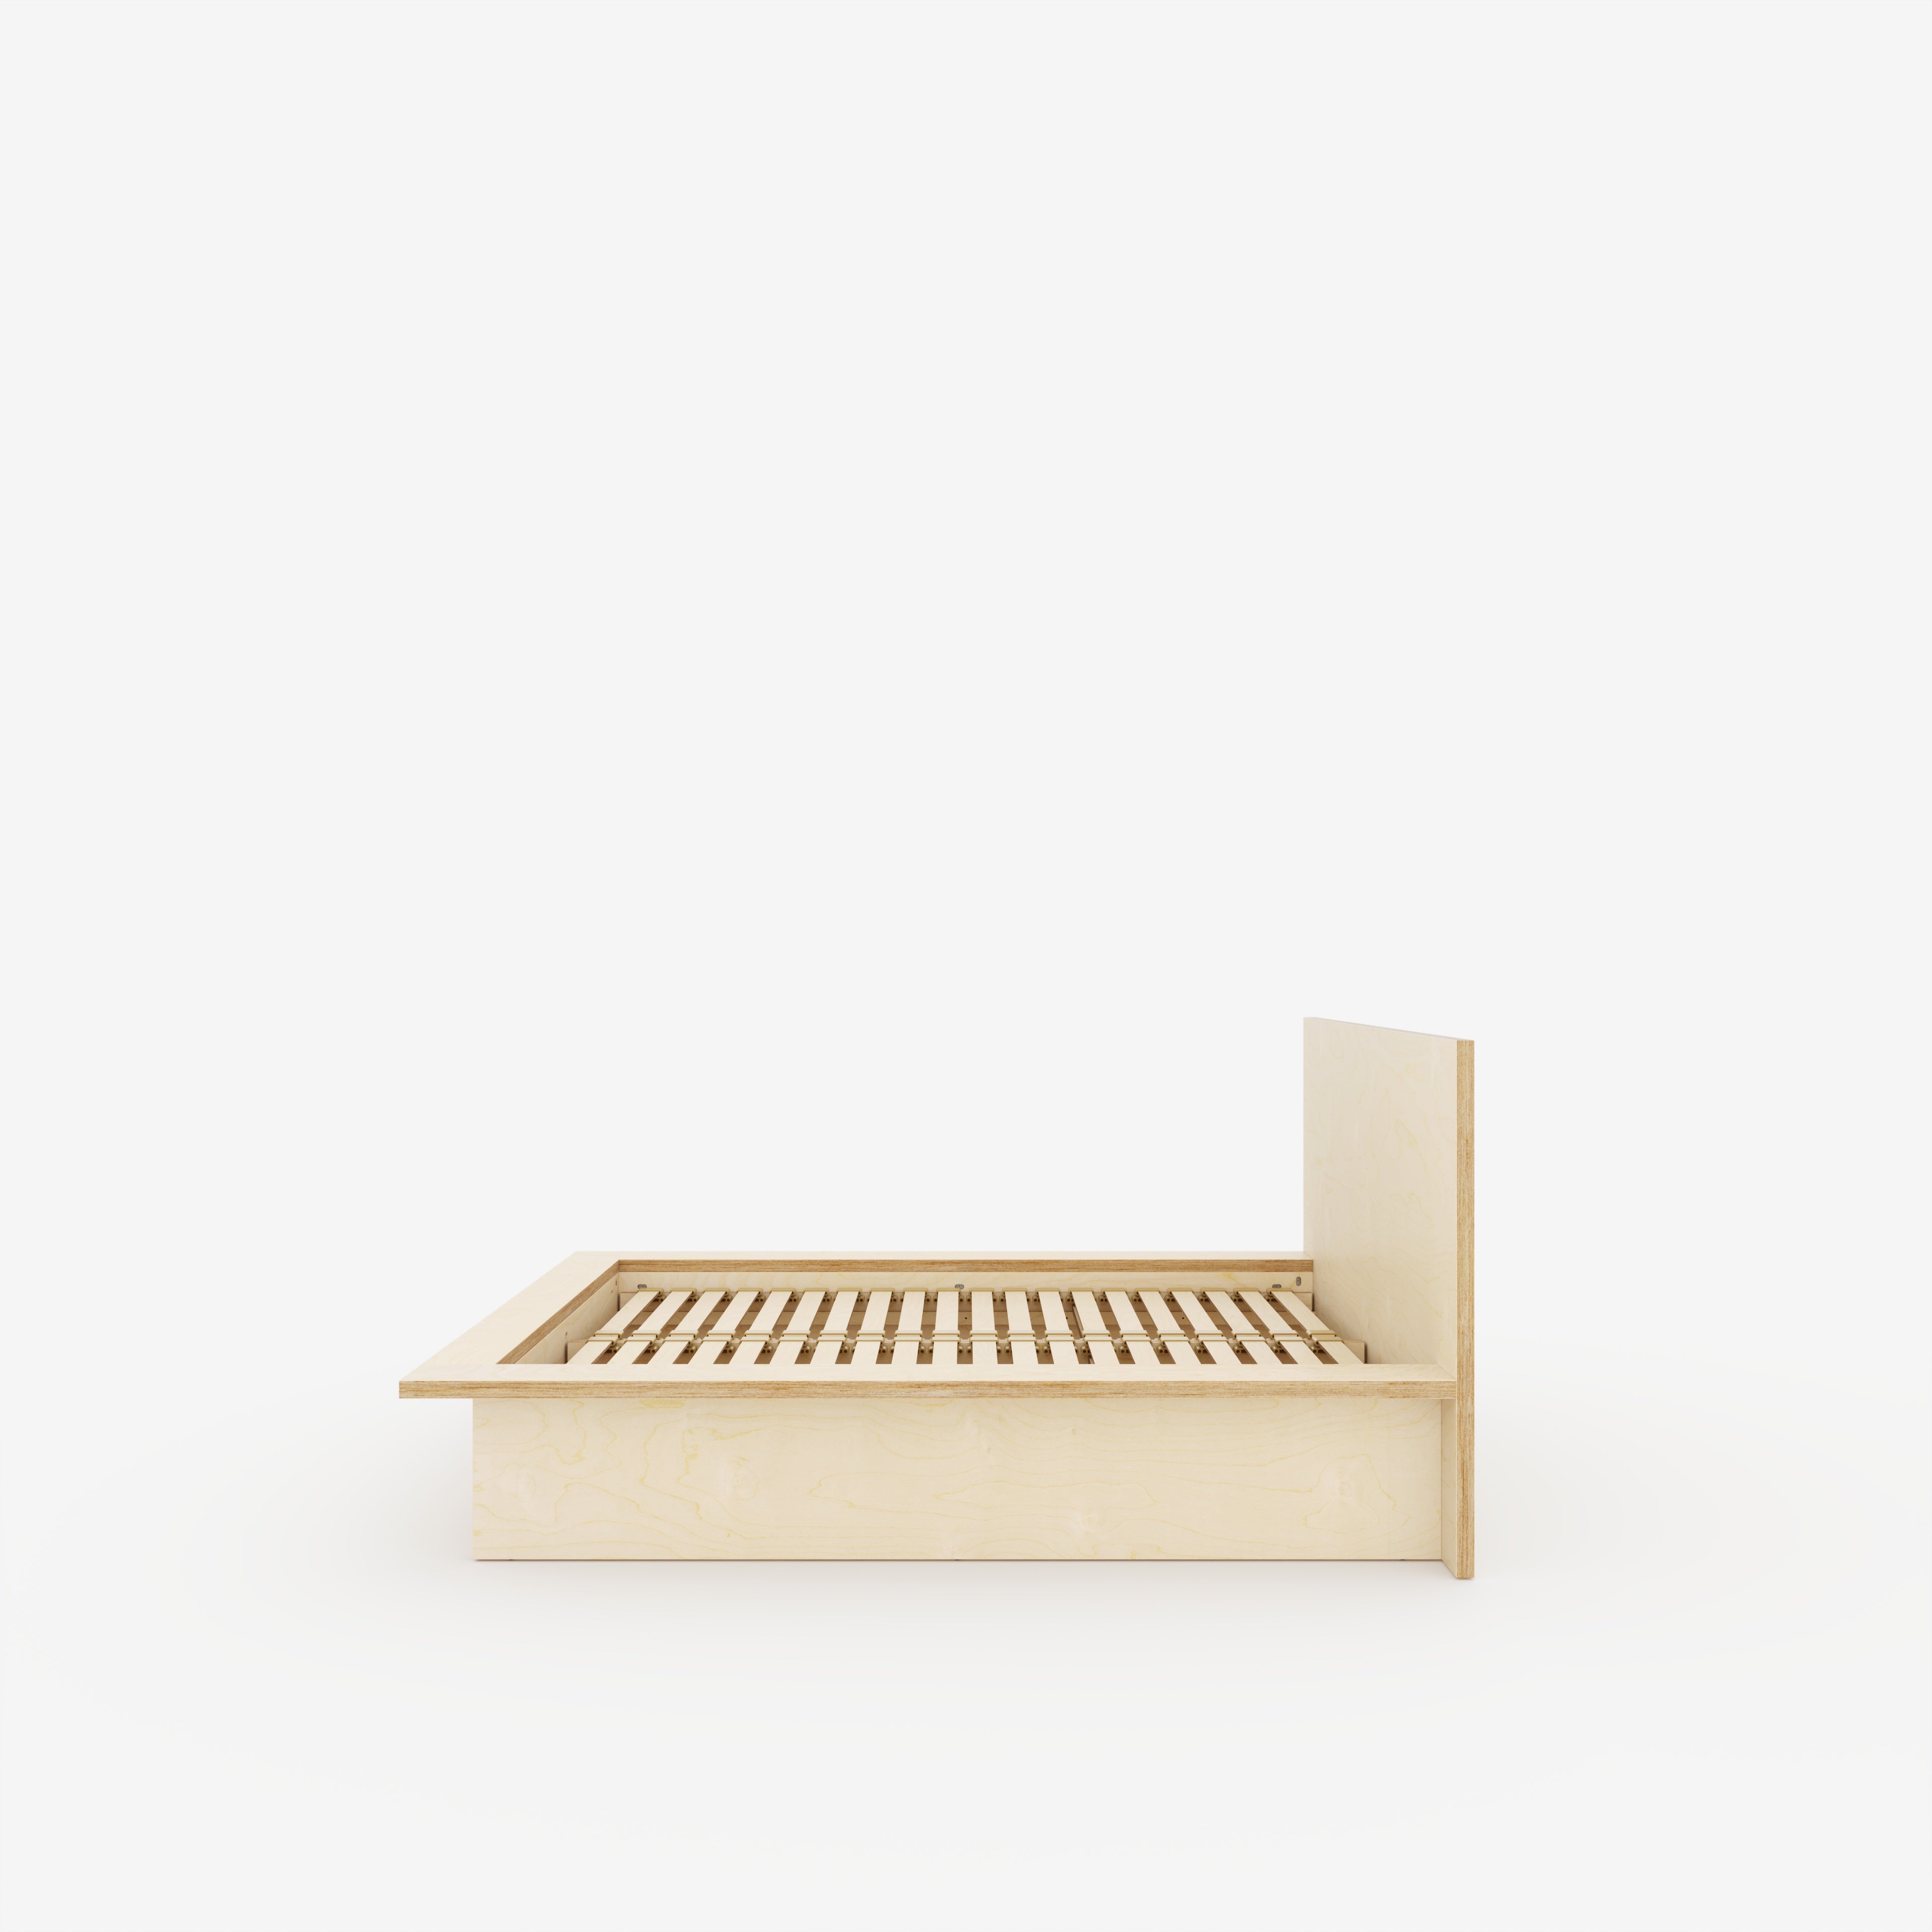 Plywood Platform Bed - Plywood Birch - Standard Double 1350(w) x 1900(d) High